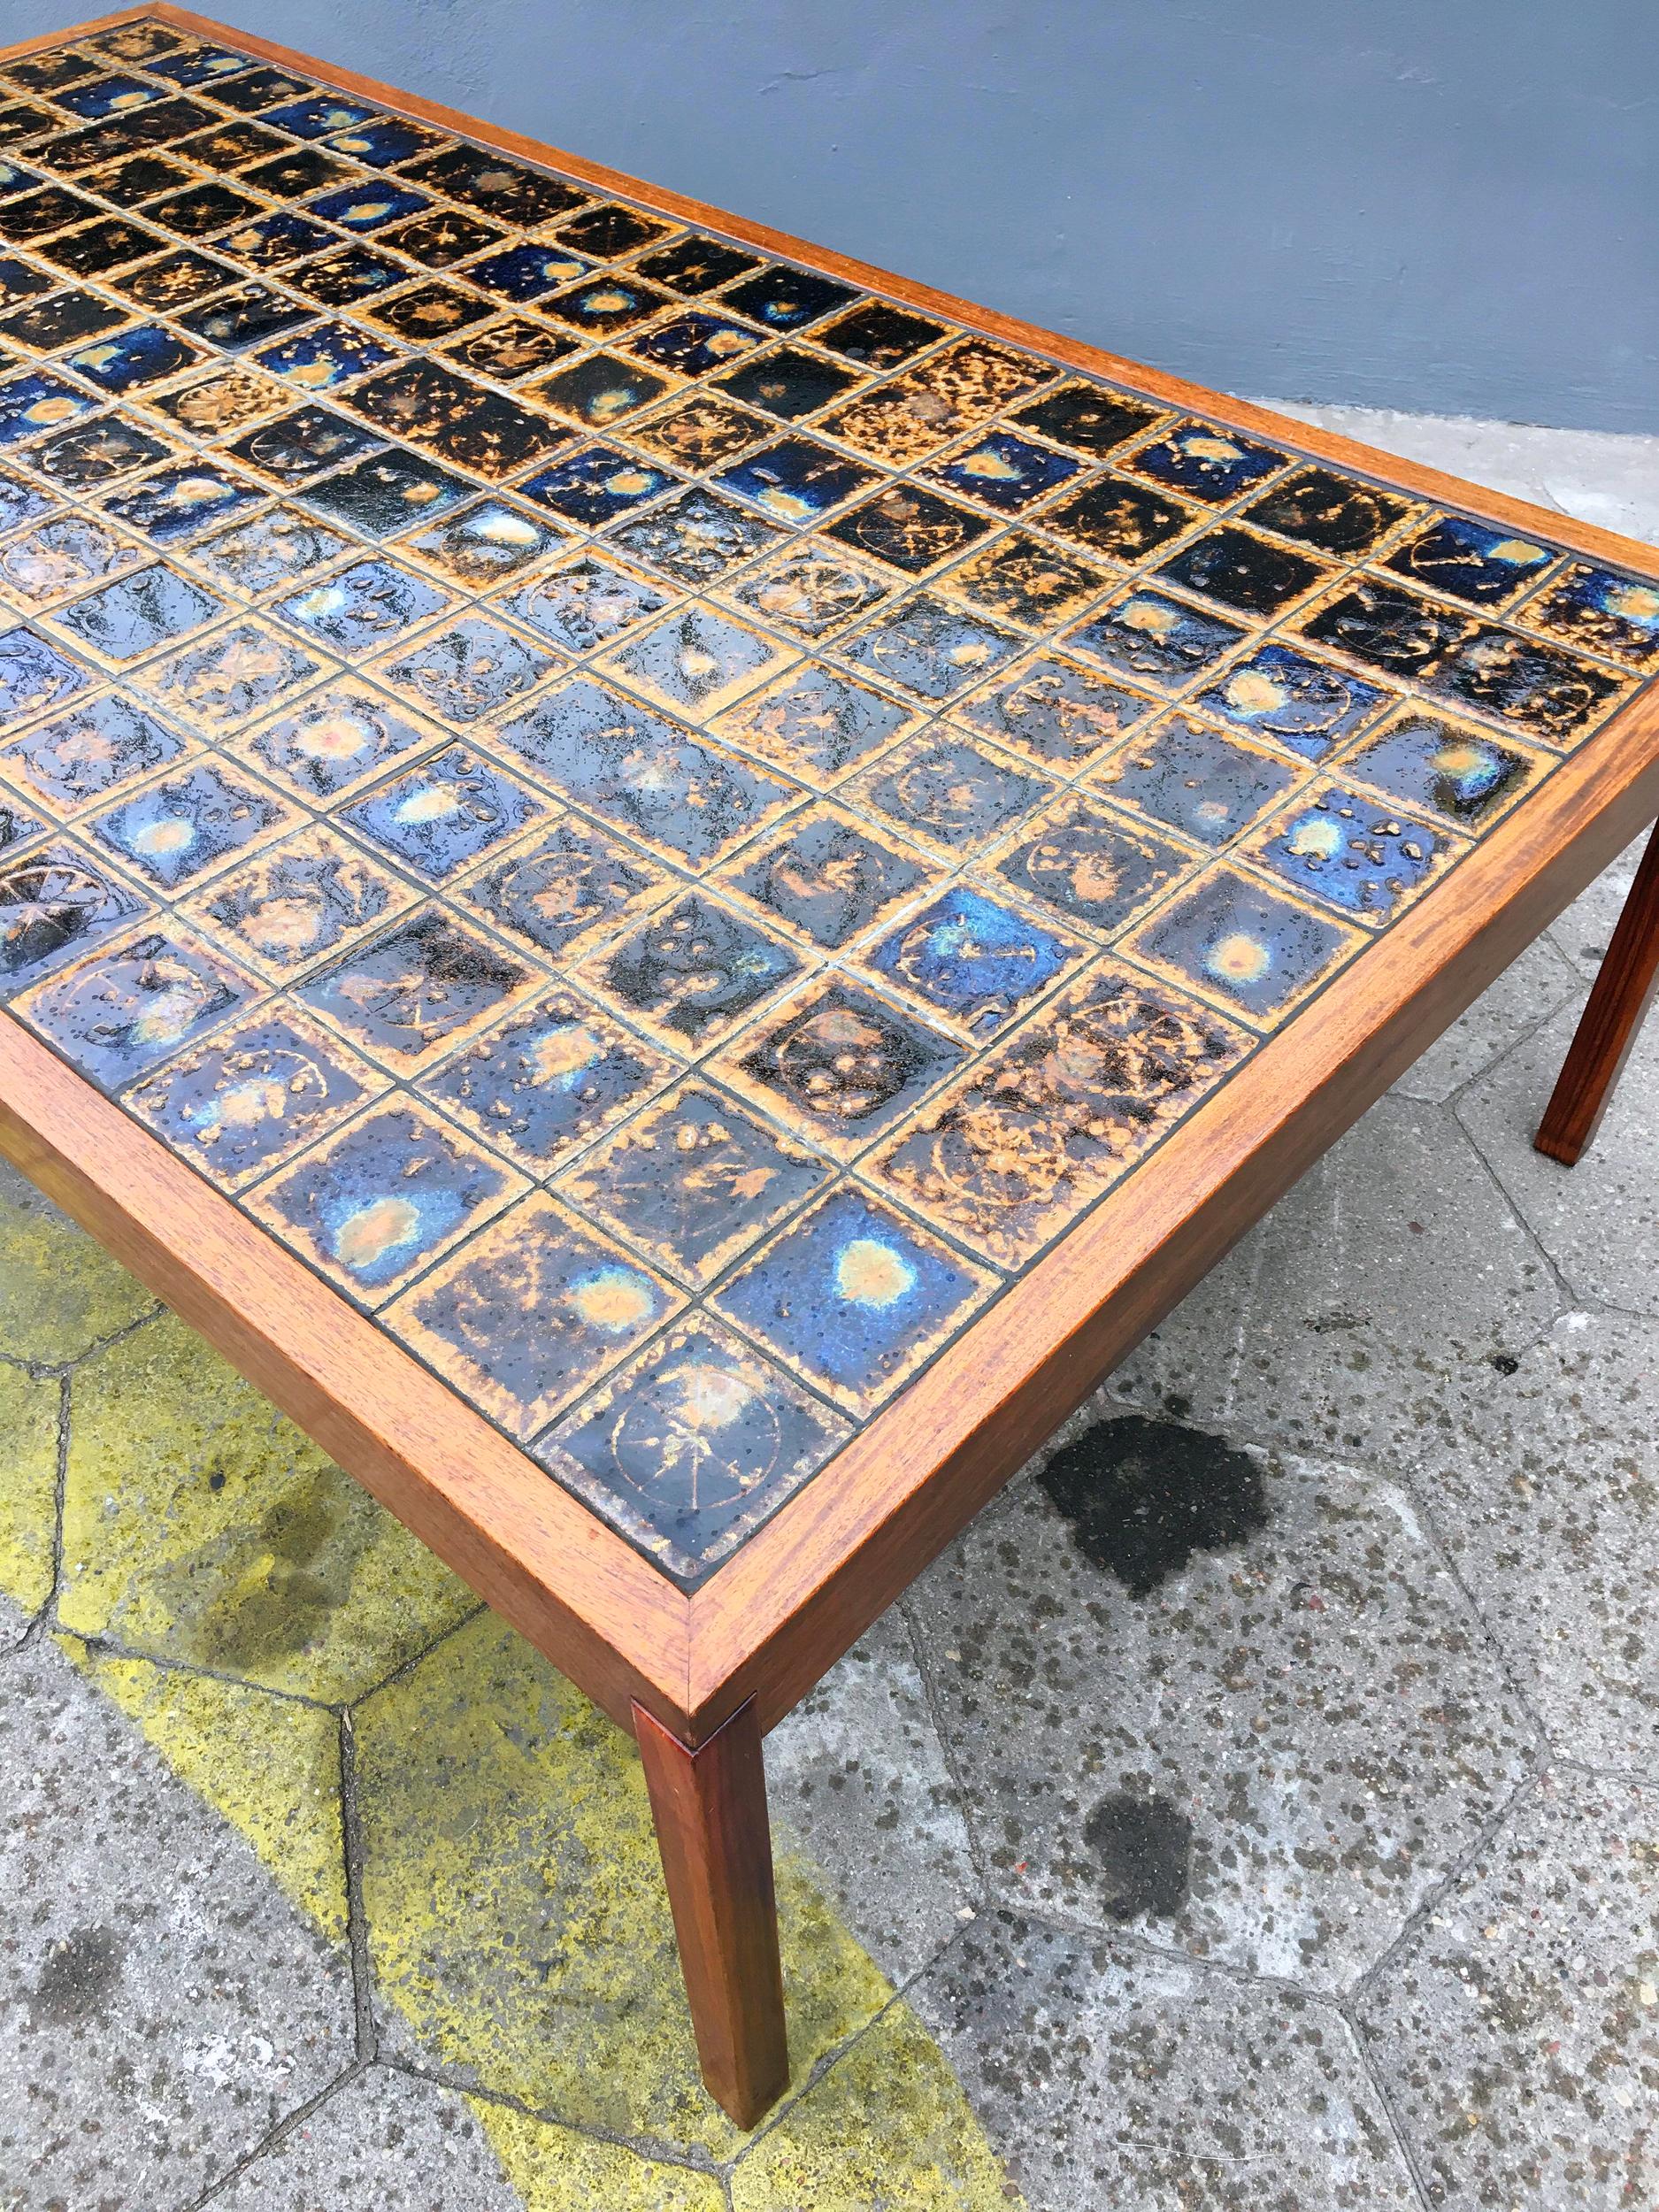 This teak wood coffee table was made in 1960s, which has no influence on his condition, which I would call ideal. The wooden surfaces are intact, also the top made of opal-colored, dark blue ceramic tiles is in perfect condition. The only thing you